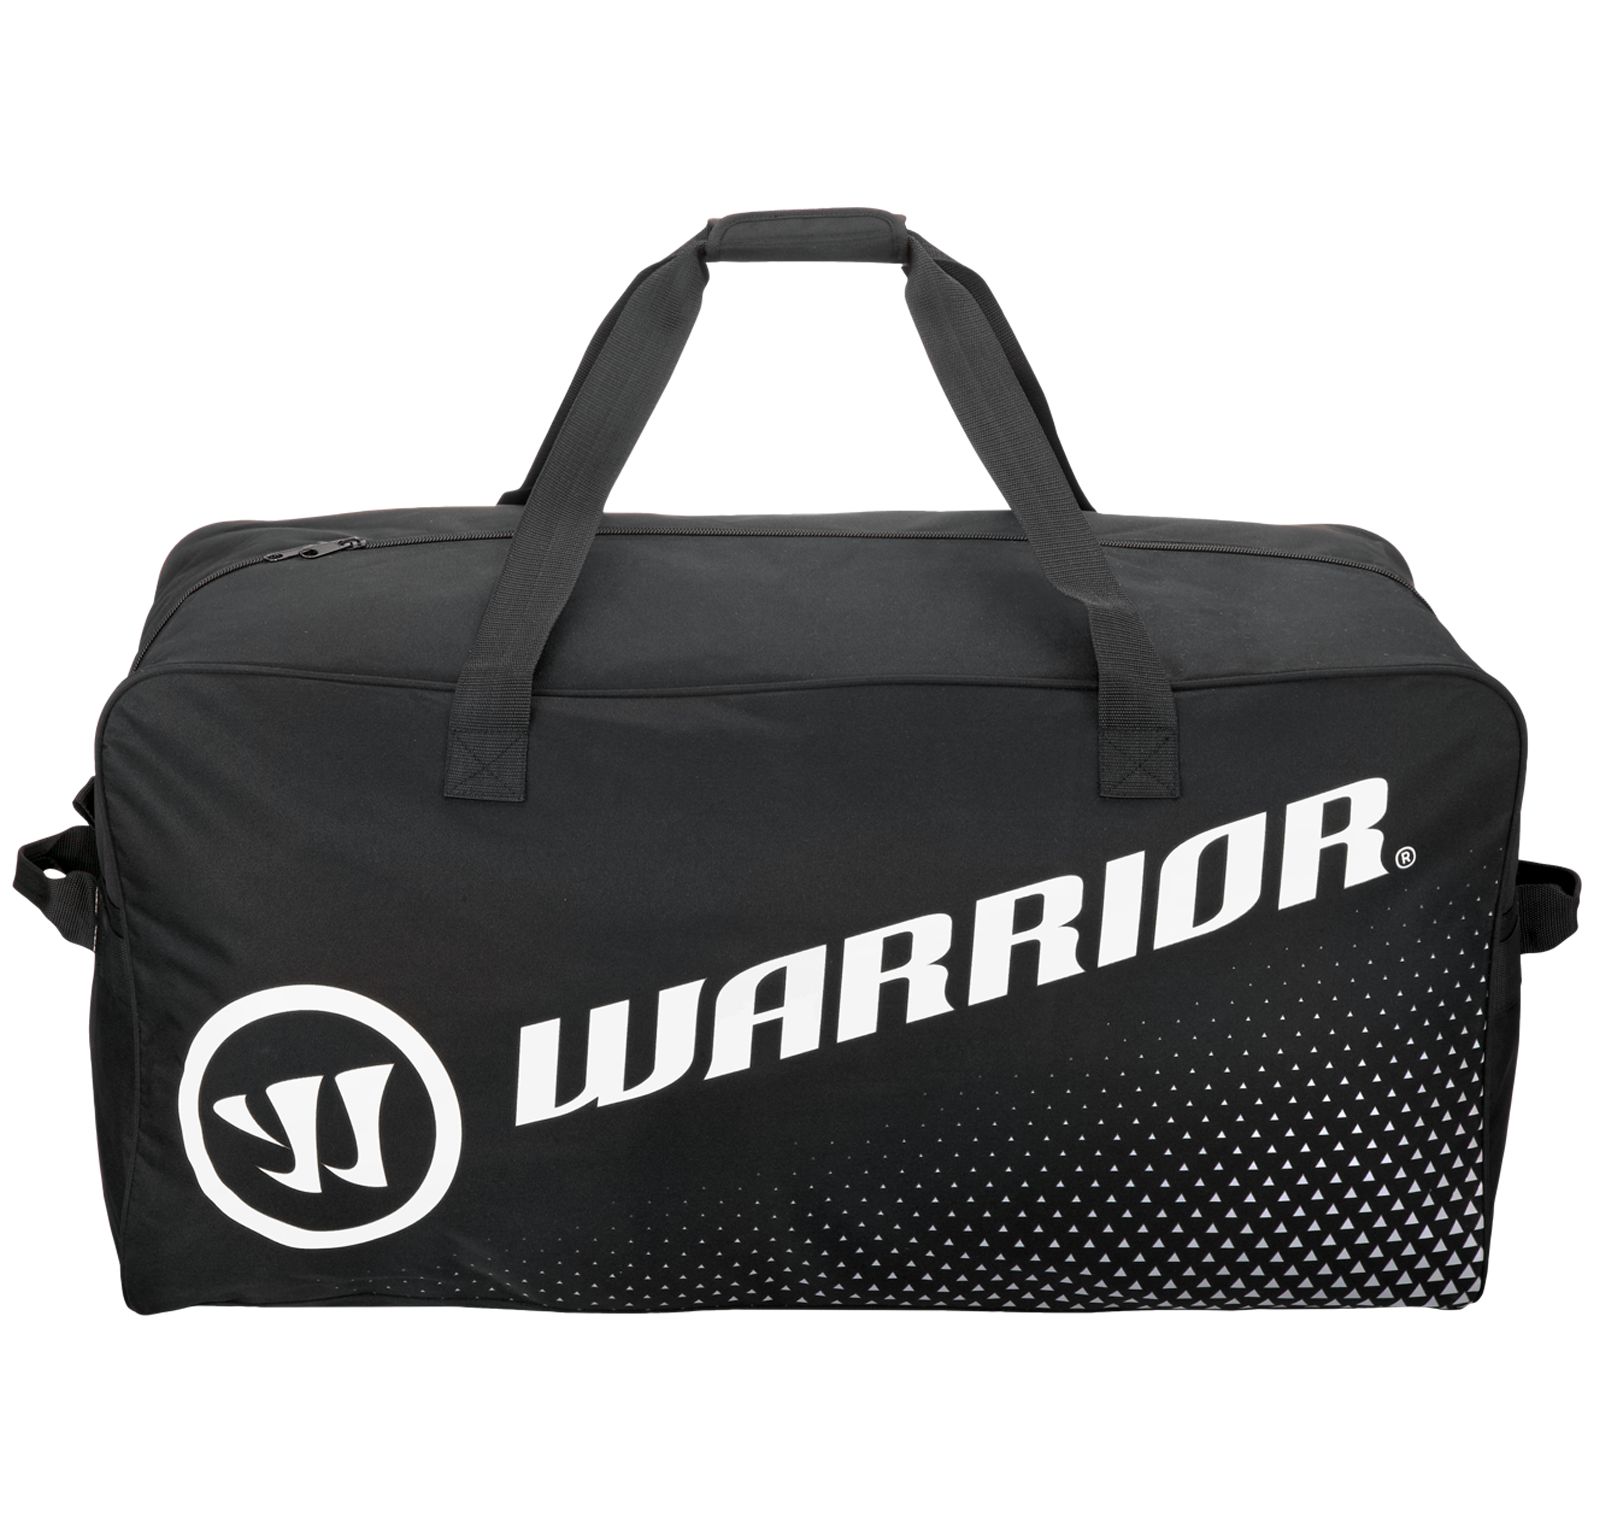 Q40 Carry Bag, Black with White & Grey image number 0